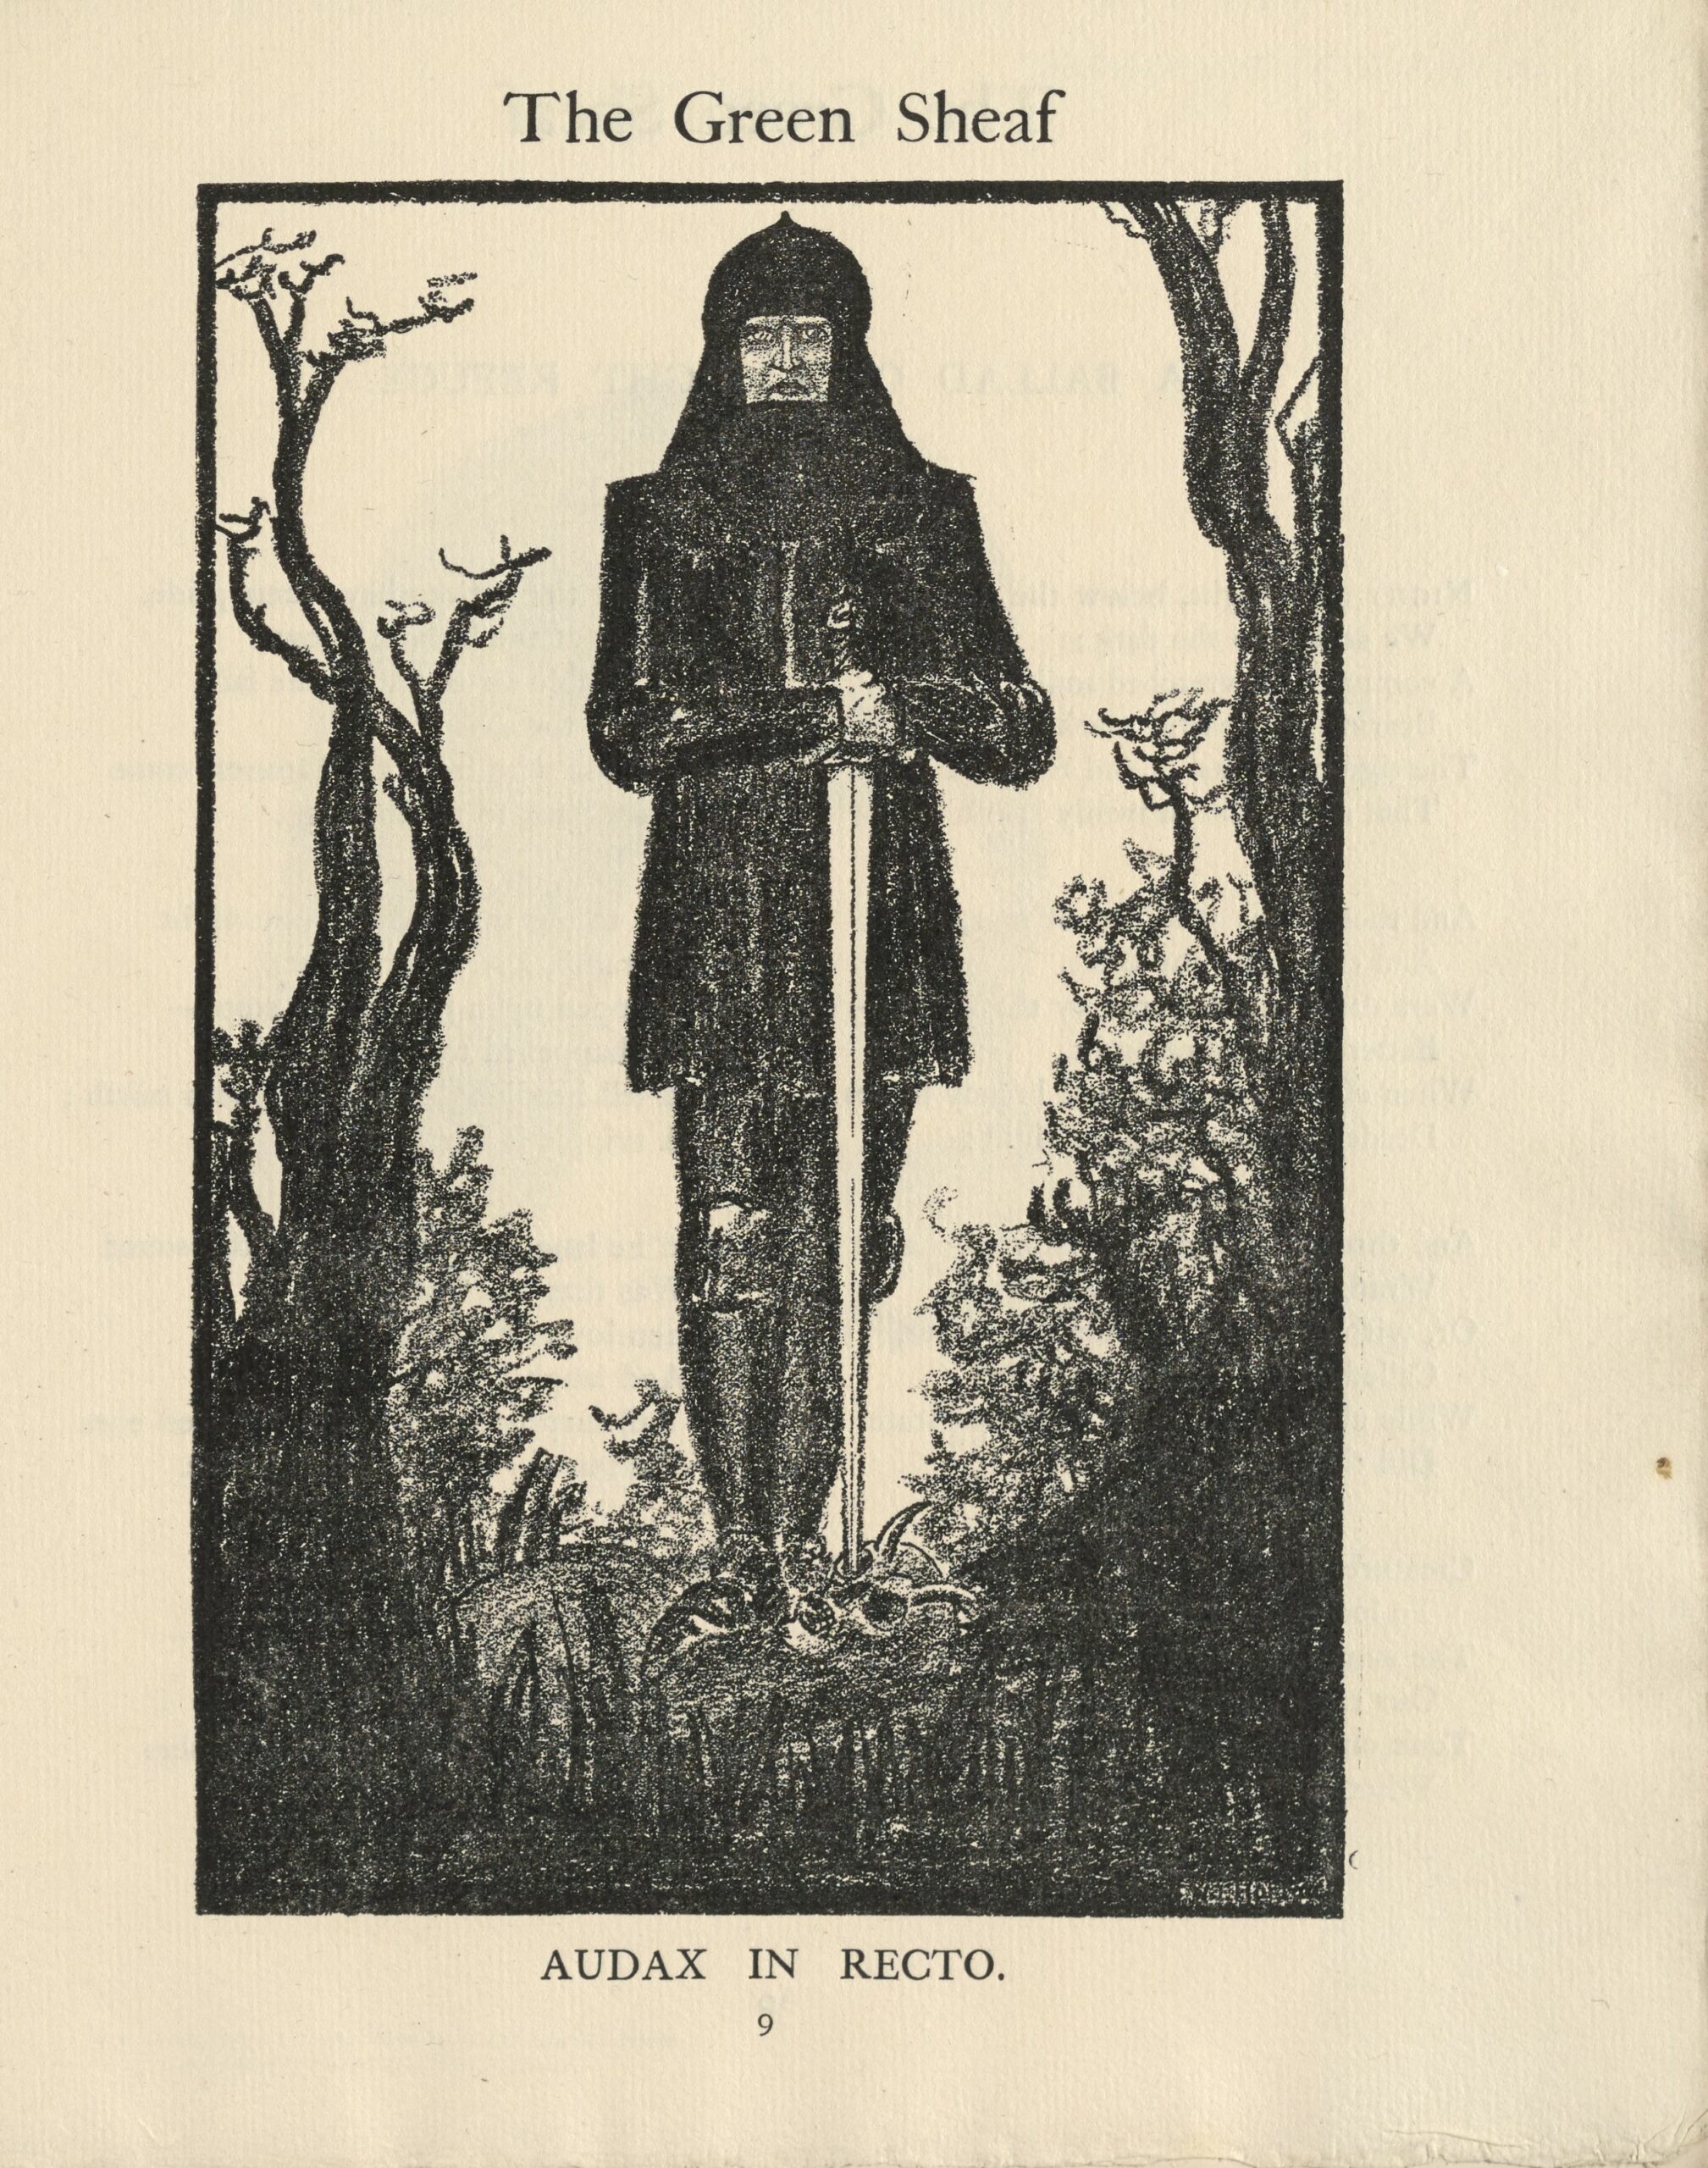 This half-tone reproduction is centered on the page, outlined in a black rectangular frame, in portrait orientation. The image, rendered in black, depicts an armoured knight, facing toward the viewer. He holds a sword whose blade pierces the eye socket of a horned skull which lies at his feet. He is surrounded by black trees, branches, and brambles. The artist’s monogram, partially obscured, is in the bottom right corner. The image’s title is printed below the image: “AUDAX IN RECTO” [i.e, the Stewart Family Motto: Bold in the Right].